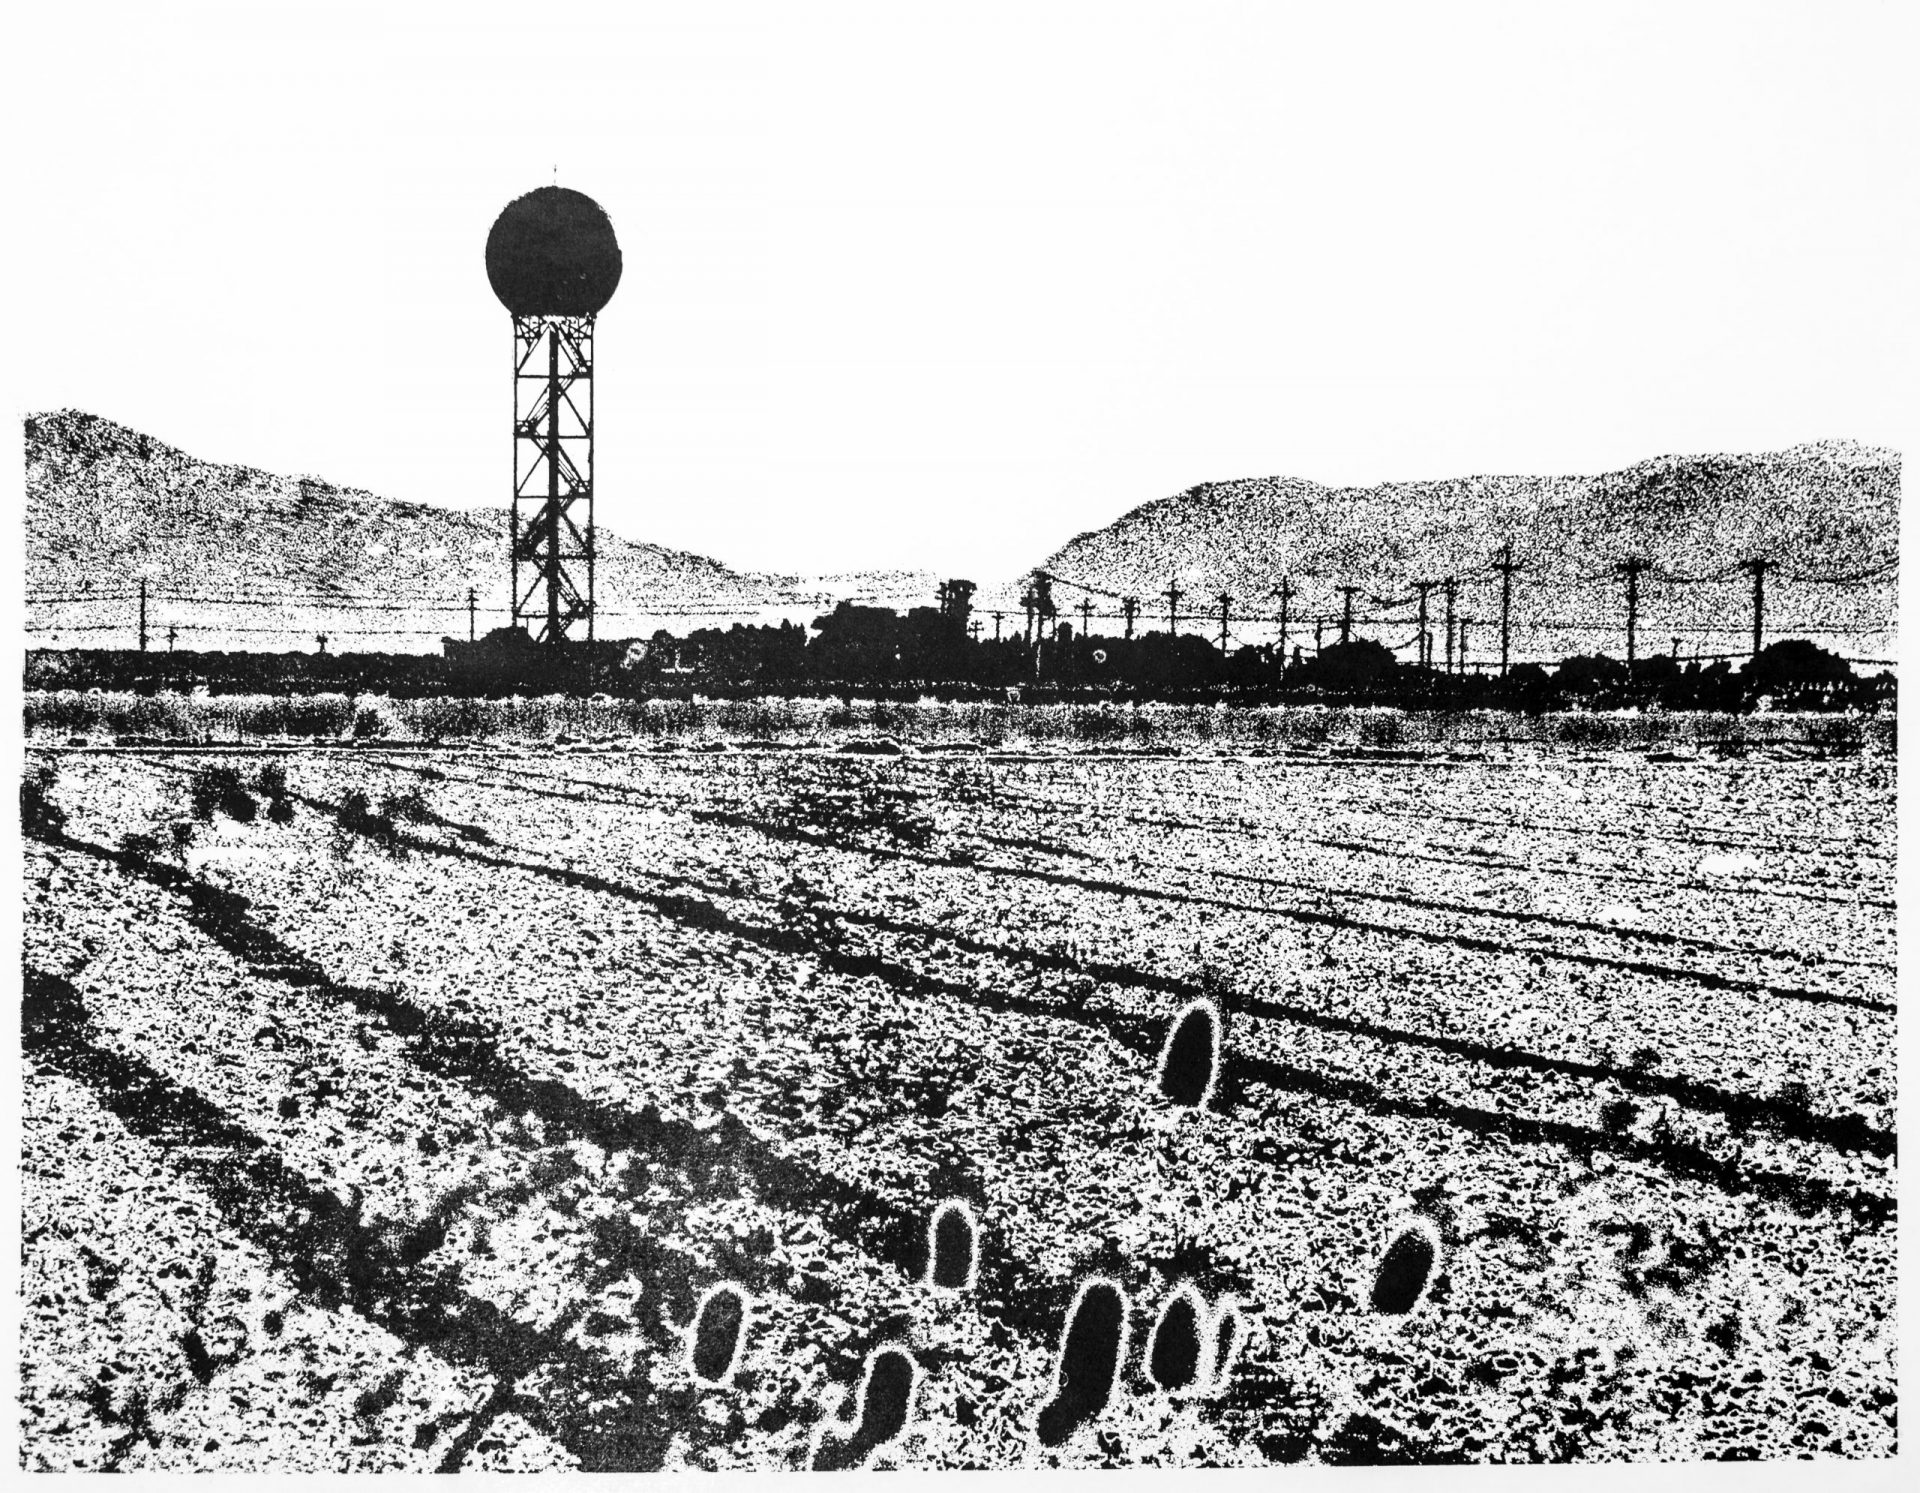 Black and white relief print of a landscape with furrows in the foreground, a doppler radar tower and power lines in the midground, and a mountain gap in the background.